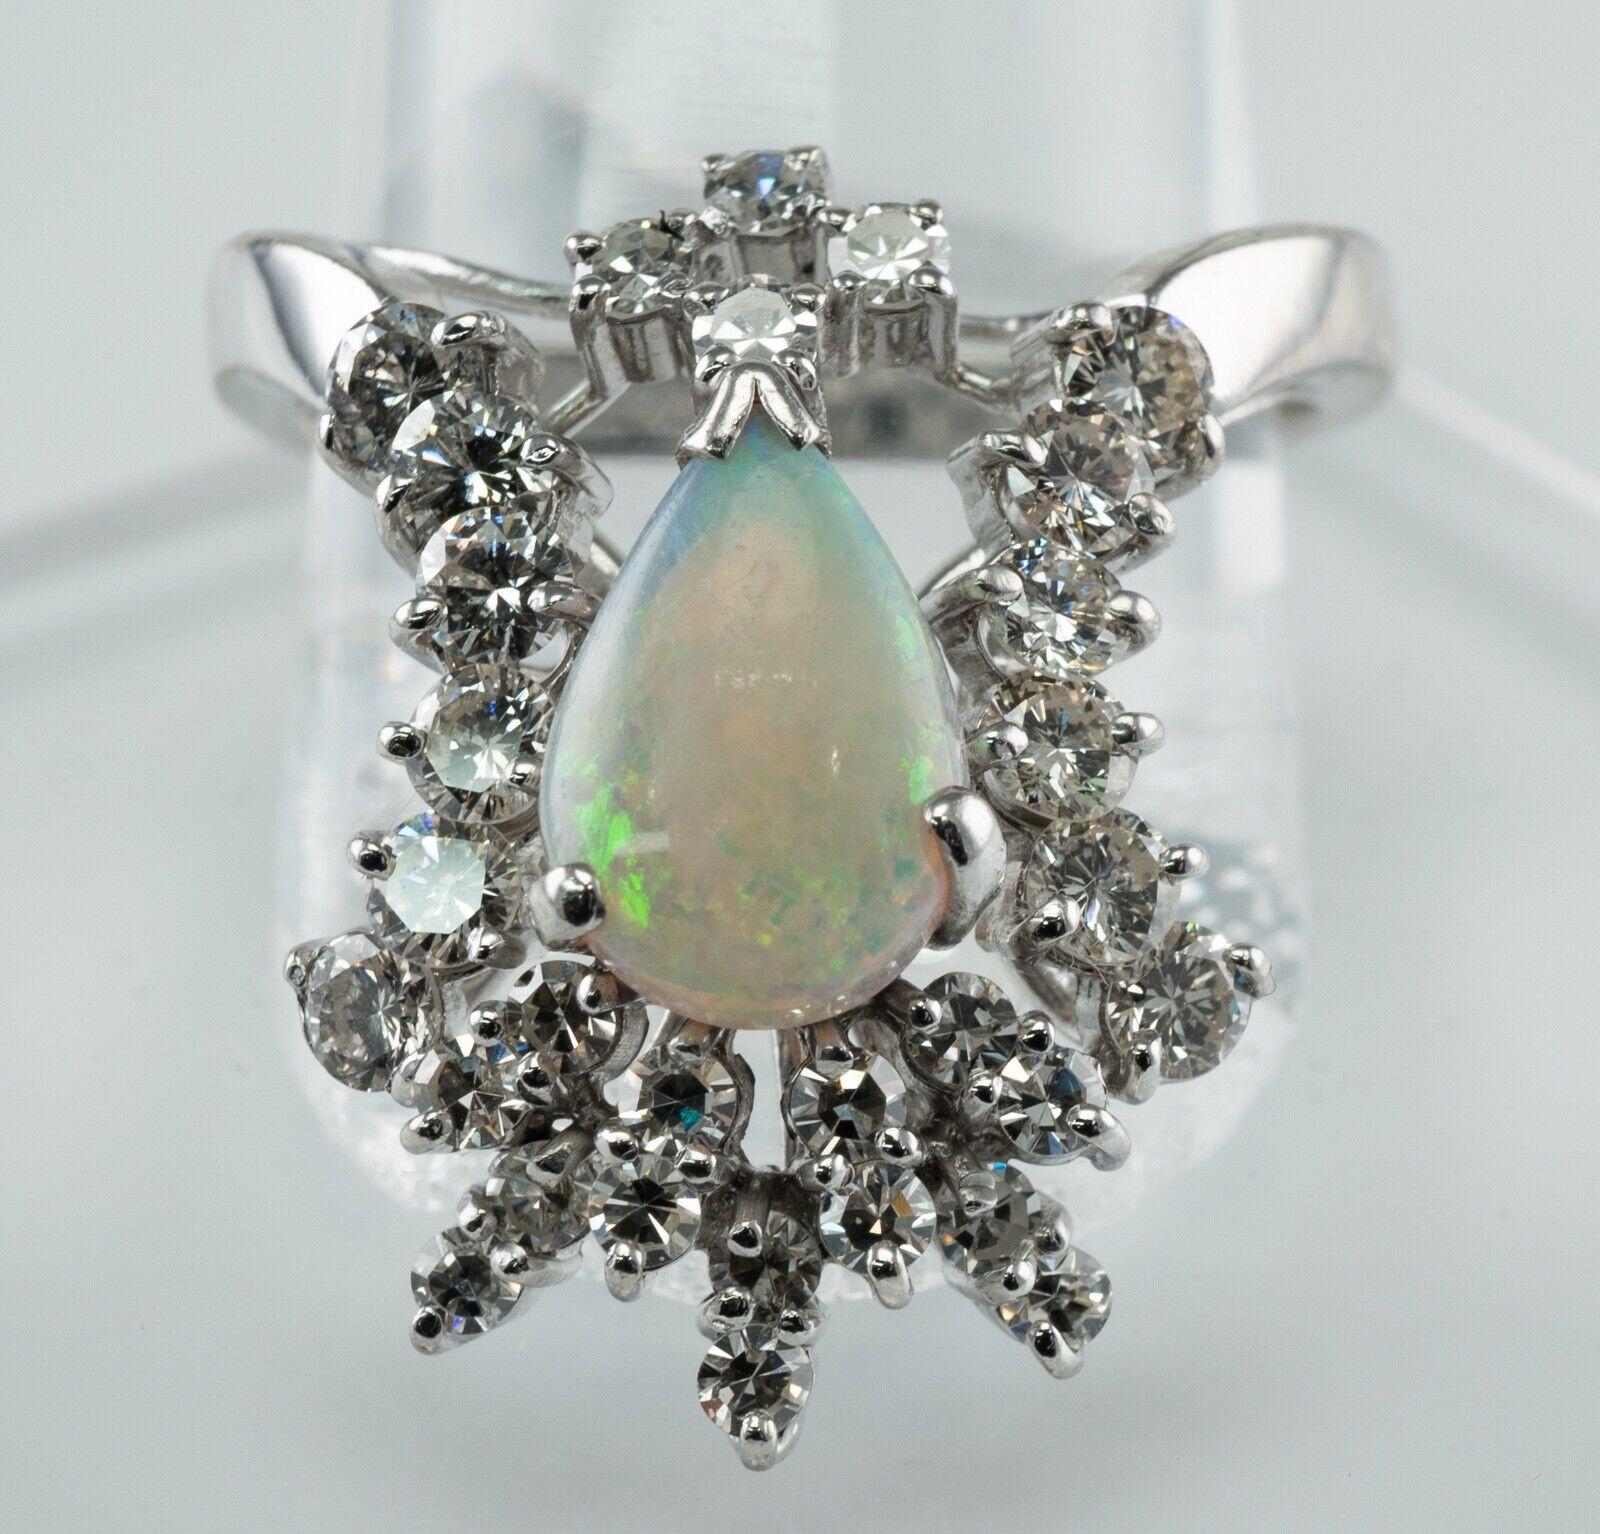 1.46 ctw Diamond Opal Ring Vintage 14K White Gold

This estate ring is made in solid 14K White Gold and set with genuine Opal and diamonds.
The center Earth mined Pear Cut Opal measures 10mm x 7mm (1.03 carats). 
It has splashes of electric green,